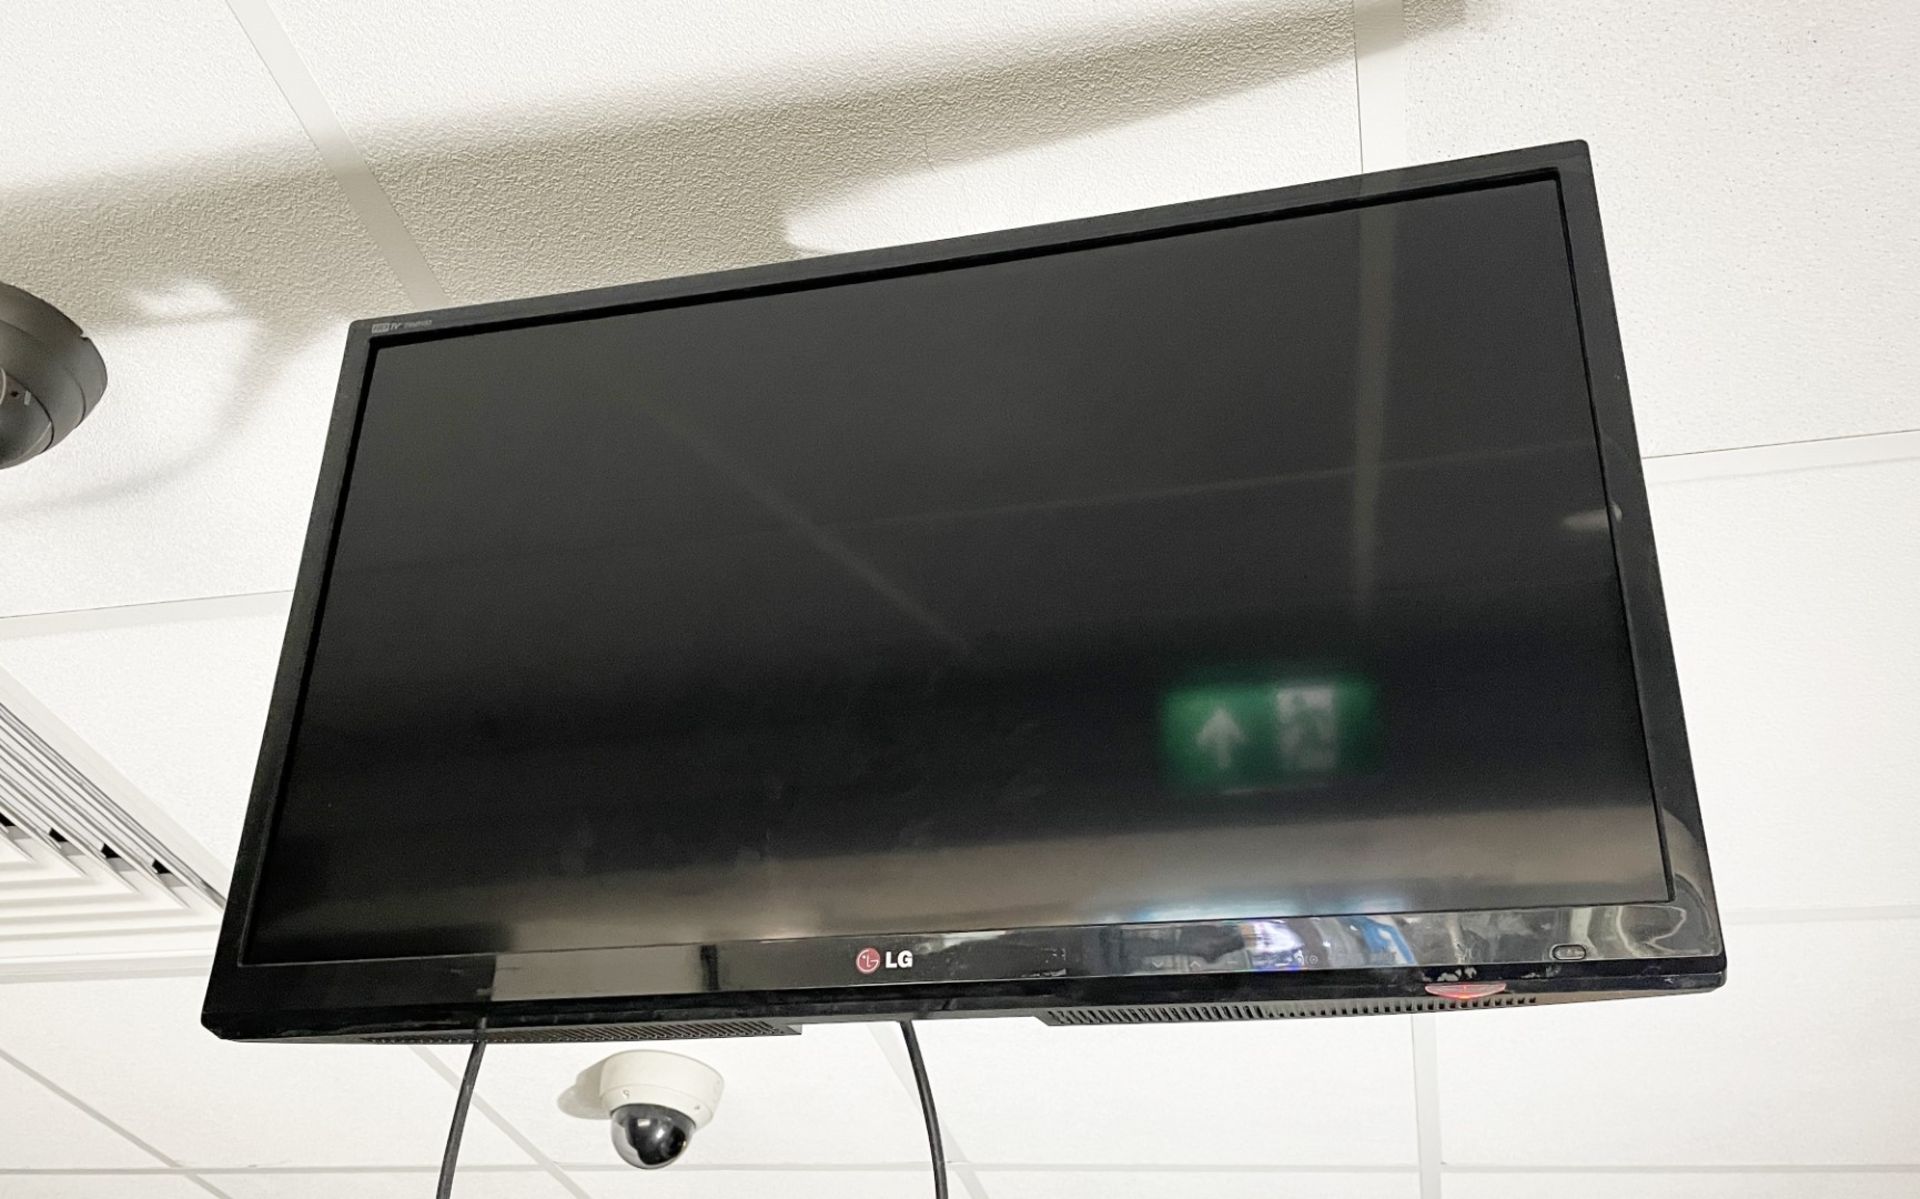 3 x LG 29 Inch LED Monitors With TV Tuners and Ceiling Mounts - CL670 - Ref: GEM205 - Location: - Image 4 of 7